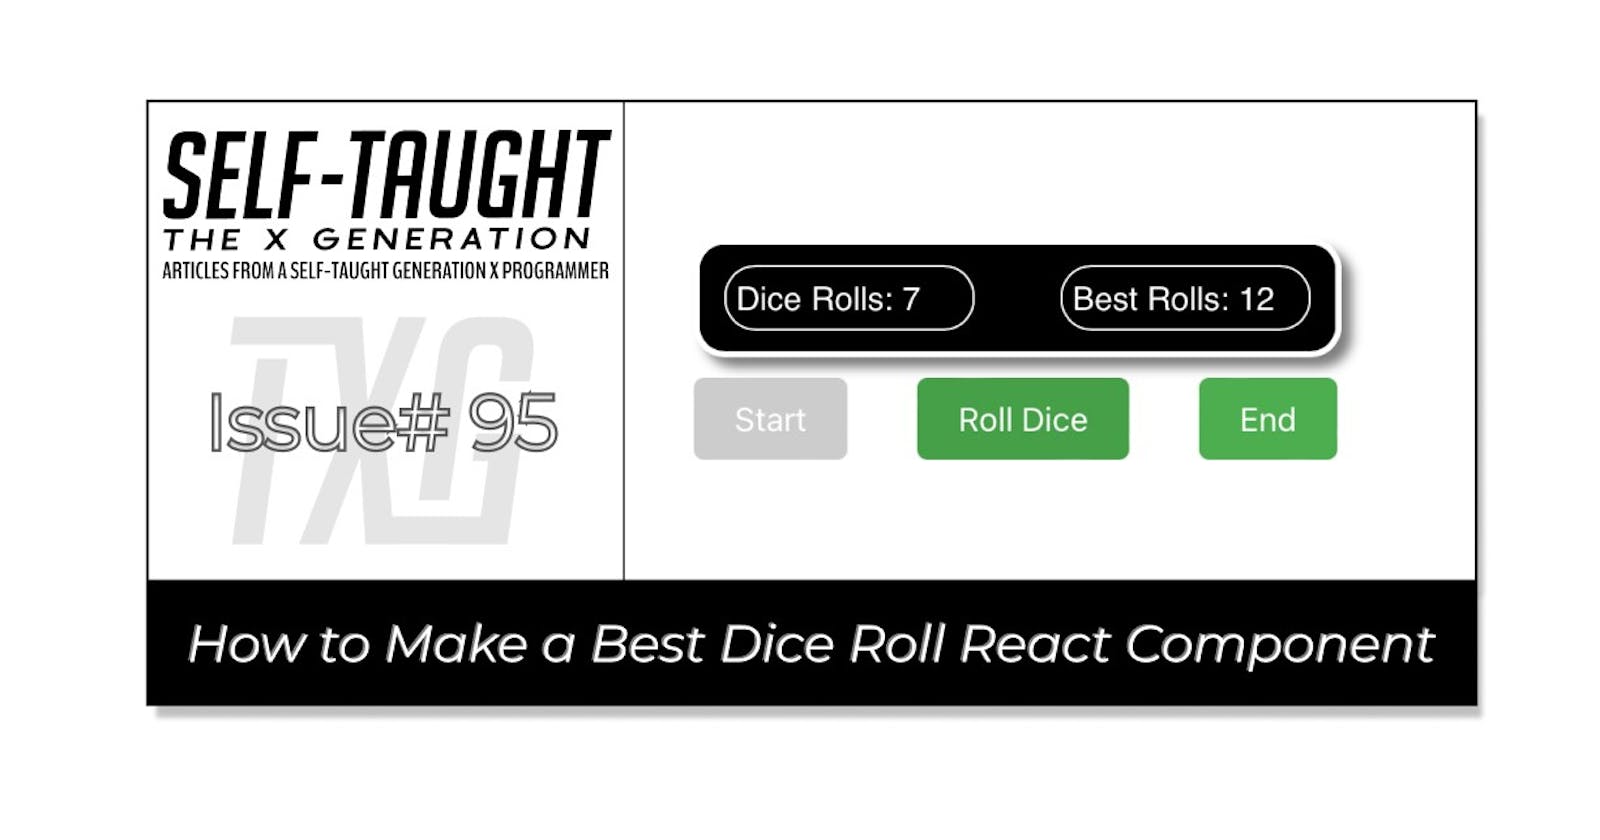 How to Make a Best Dice Roll React Component